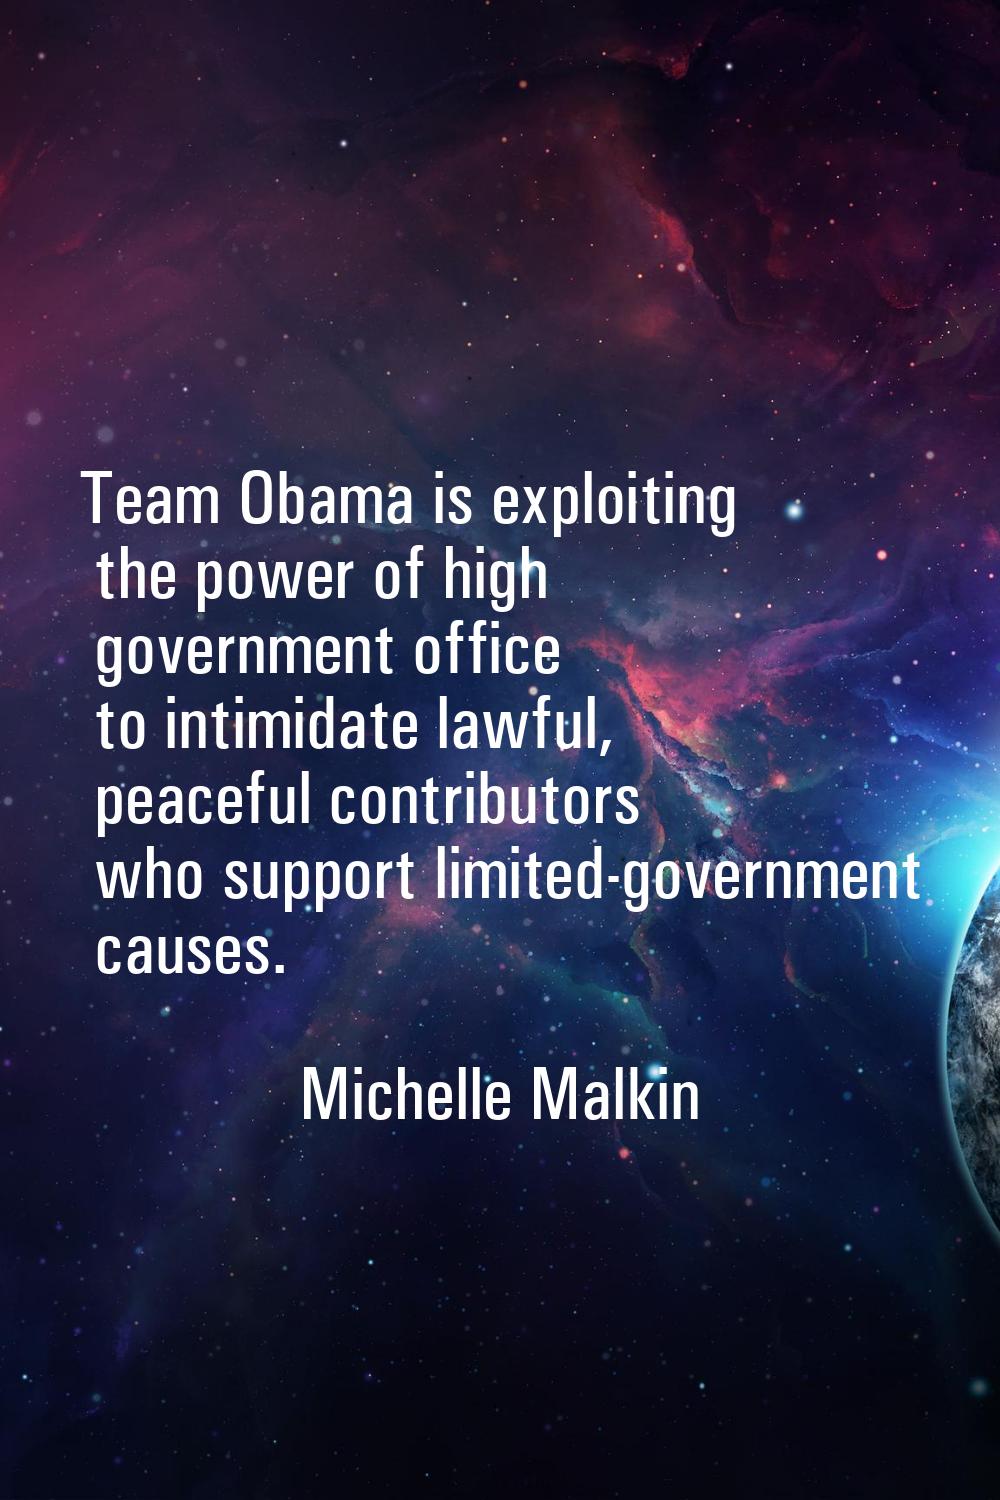 Team Obama is exploiting the power of high government office to intimidate lawful, peaceful contrib